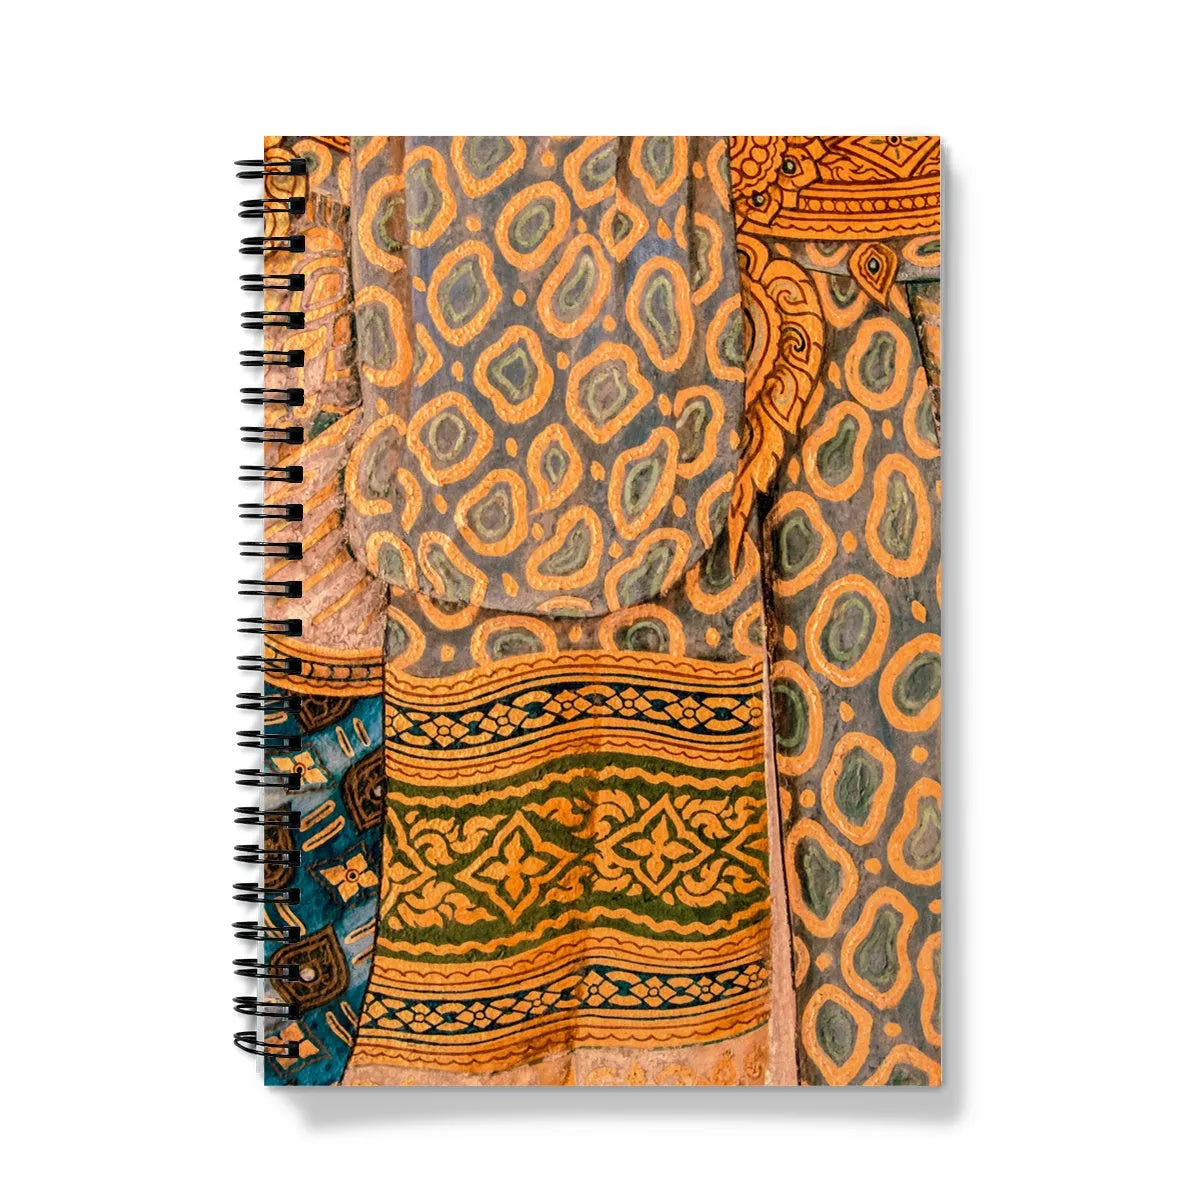 Lady In Waiting Notebook - A5 - Graph Paper - Notebooks & Notepads - Aesthetic Art